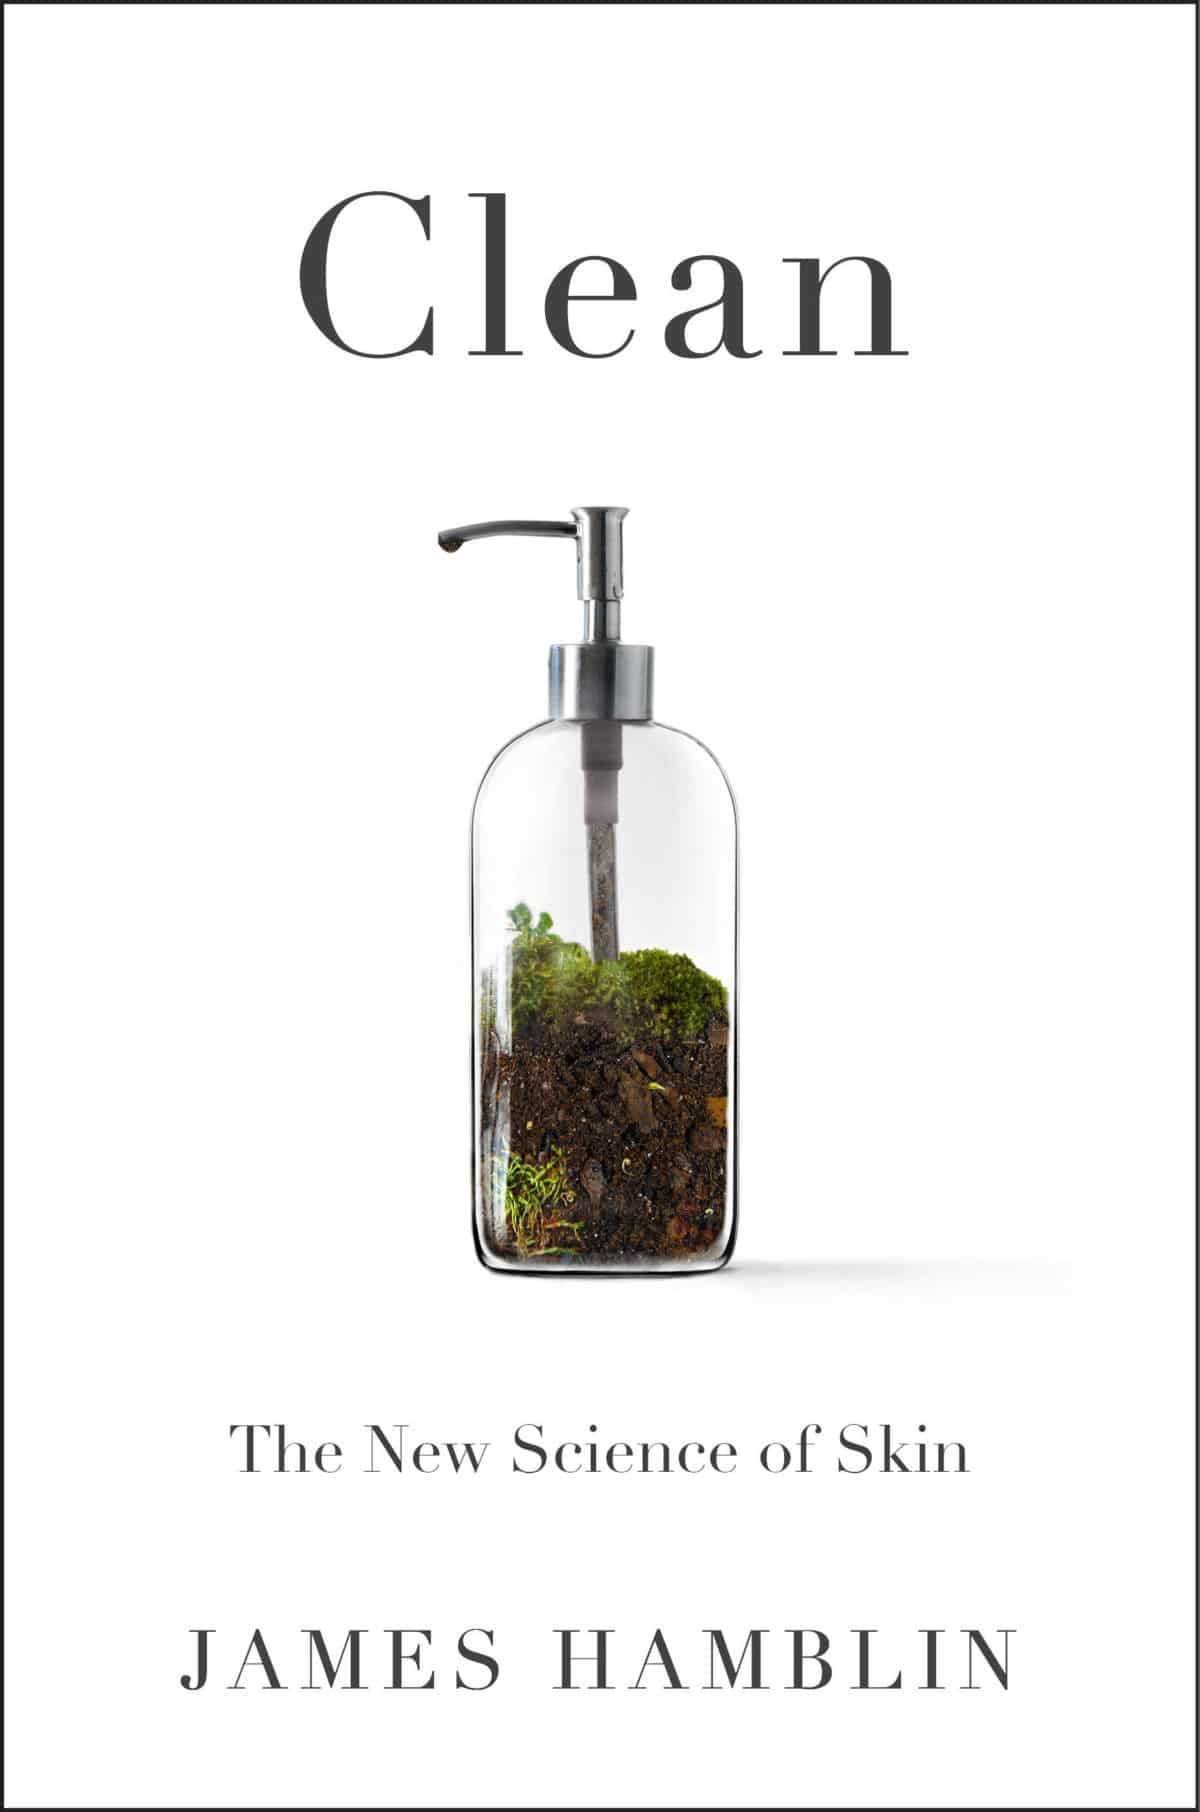 Clean-the-new-science-of-skin-cover-1200x1812.jpg